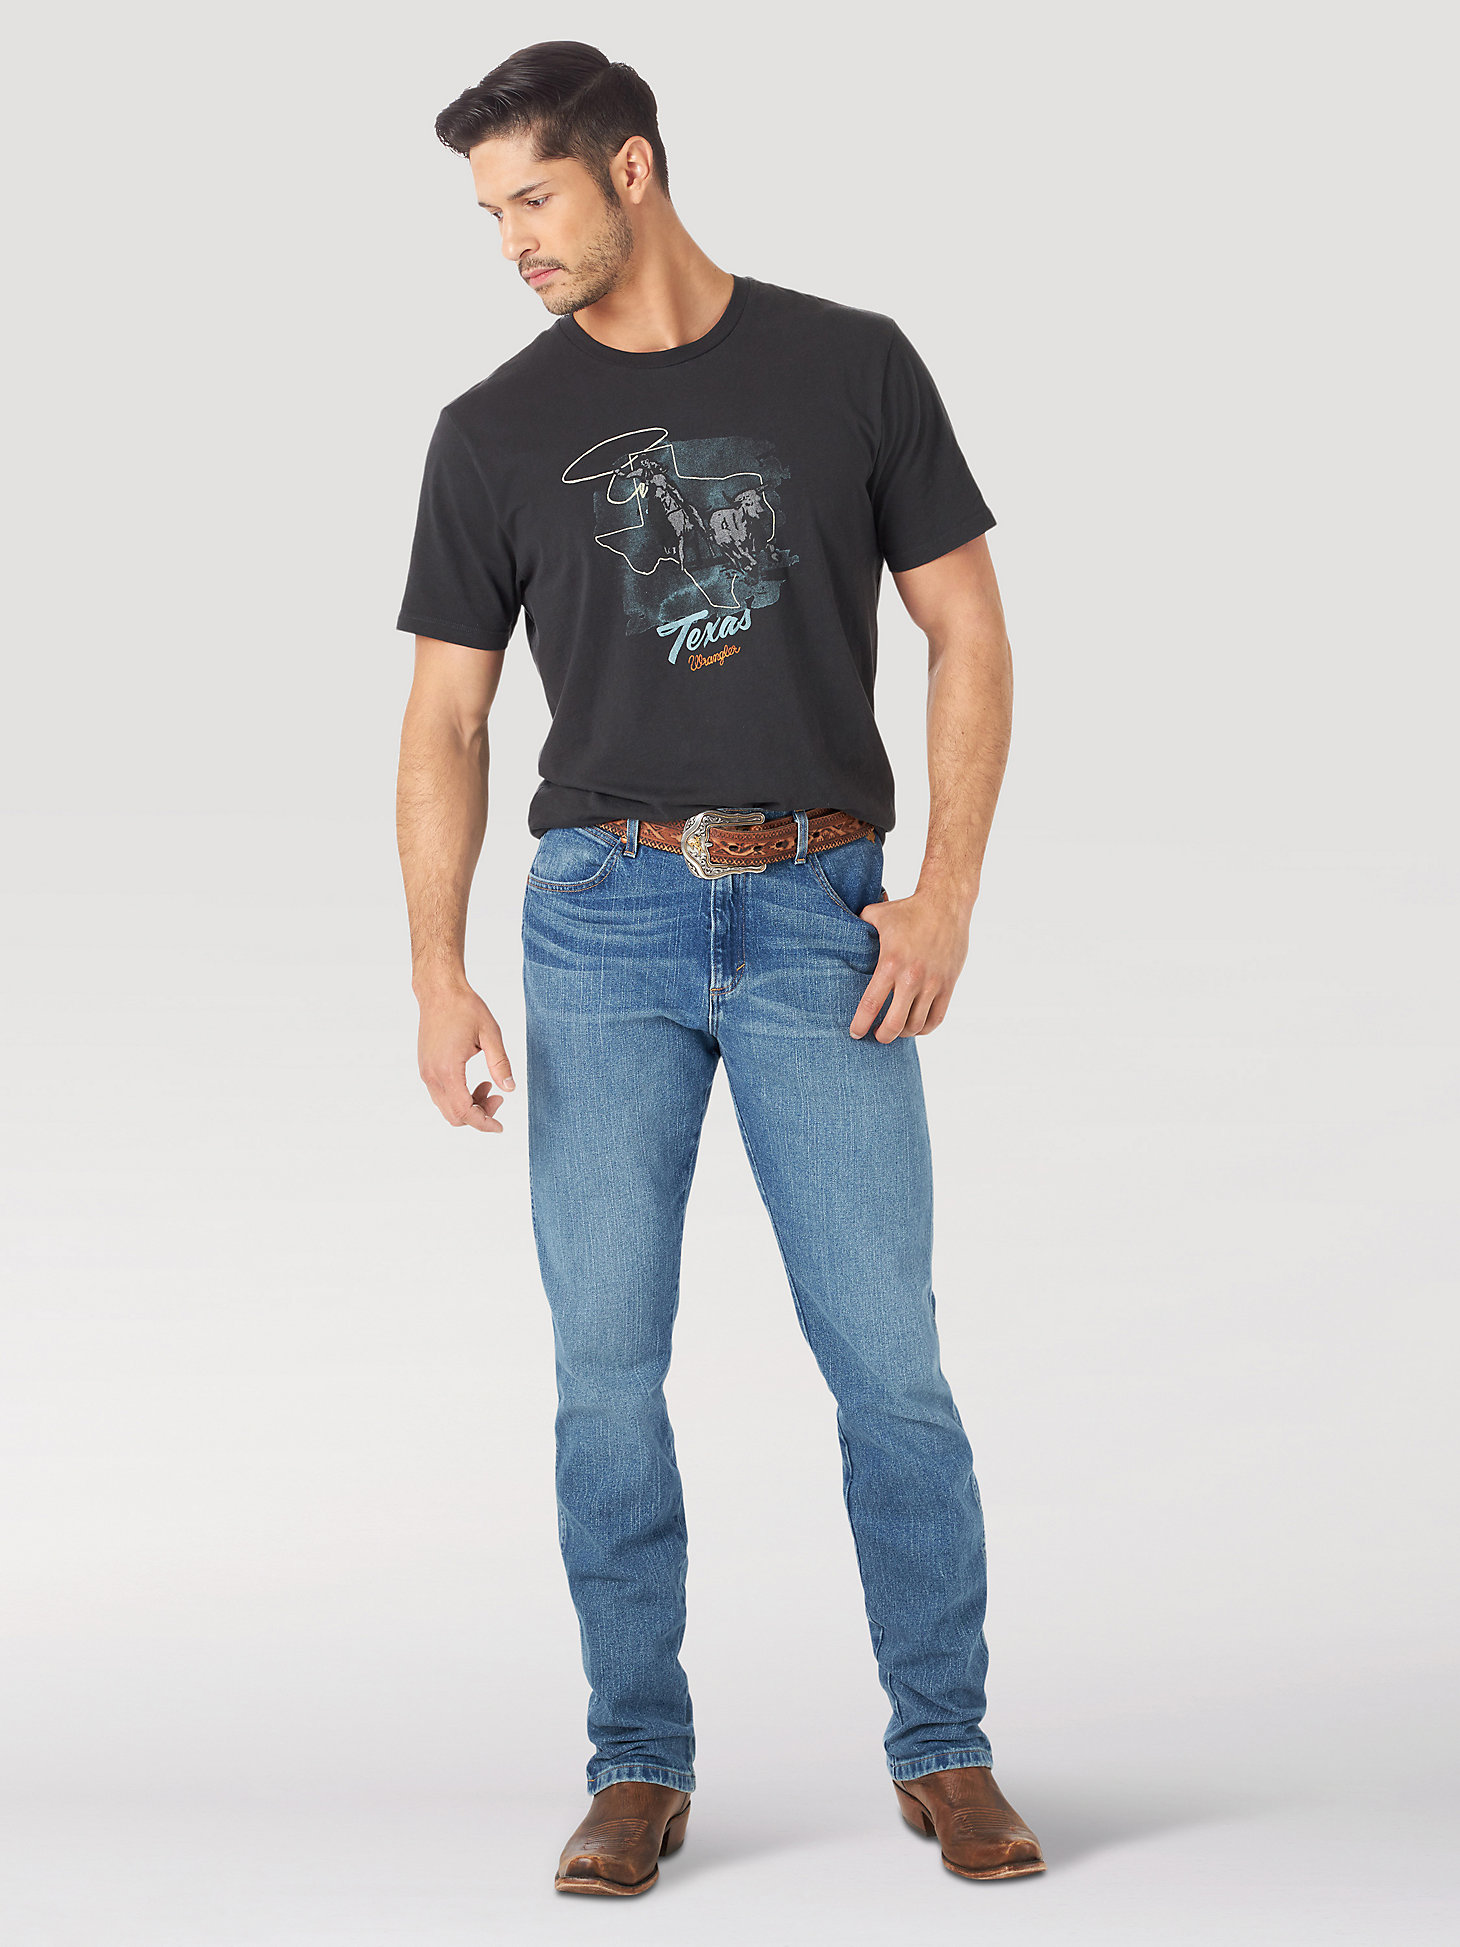 Men's Wrangler Rooted Collection™ Slim Fit Straight Leg Jean with Texas Cotton in Blue alternative view 1